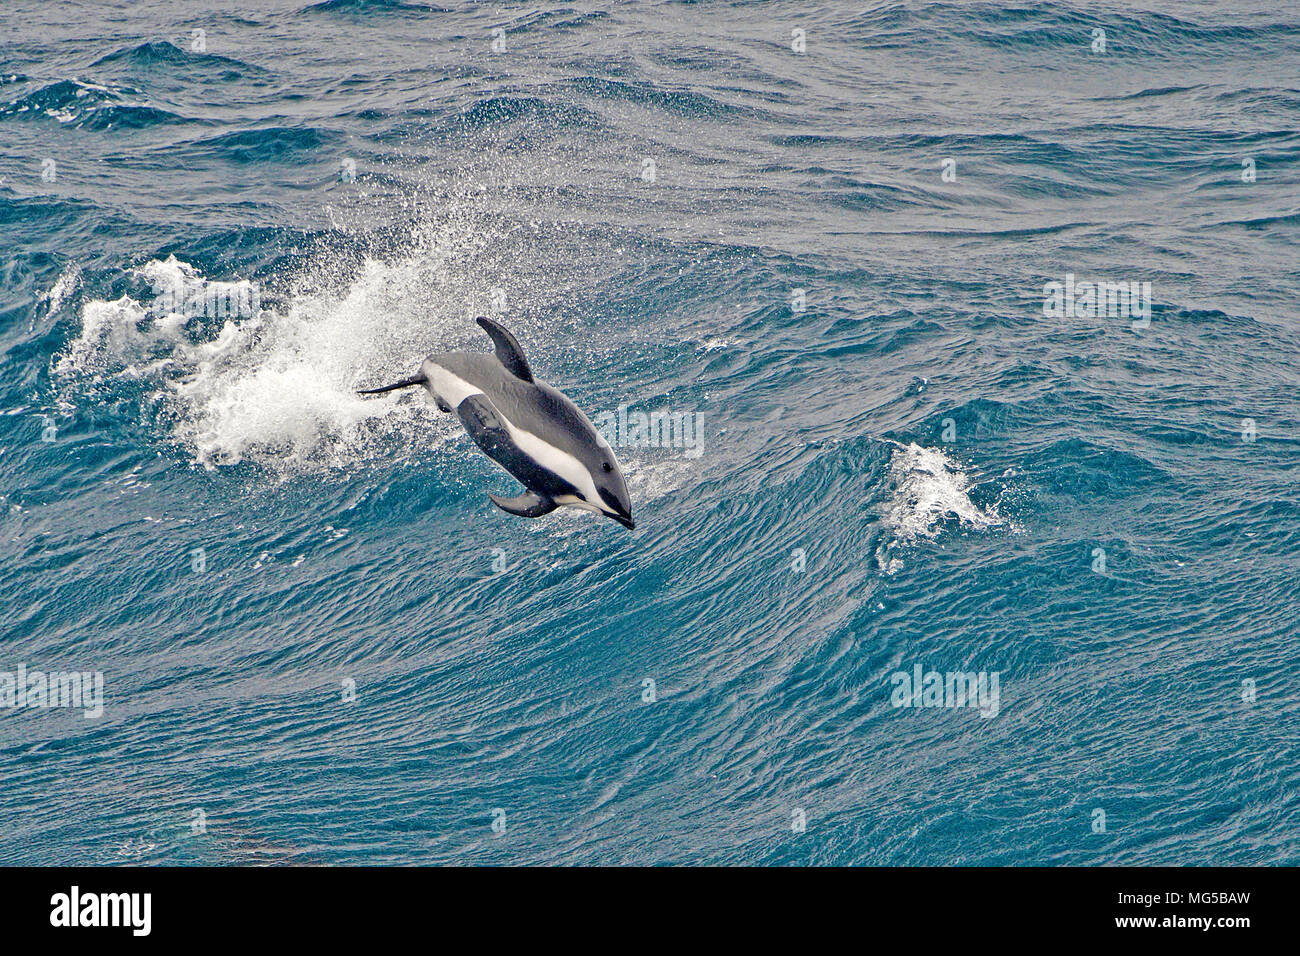 Hourglass Dolphin (Lagenorhynchus cruciger), leaping, South Georgia Stock Photo